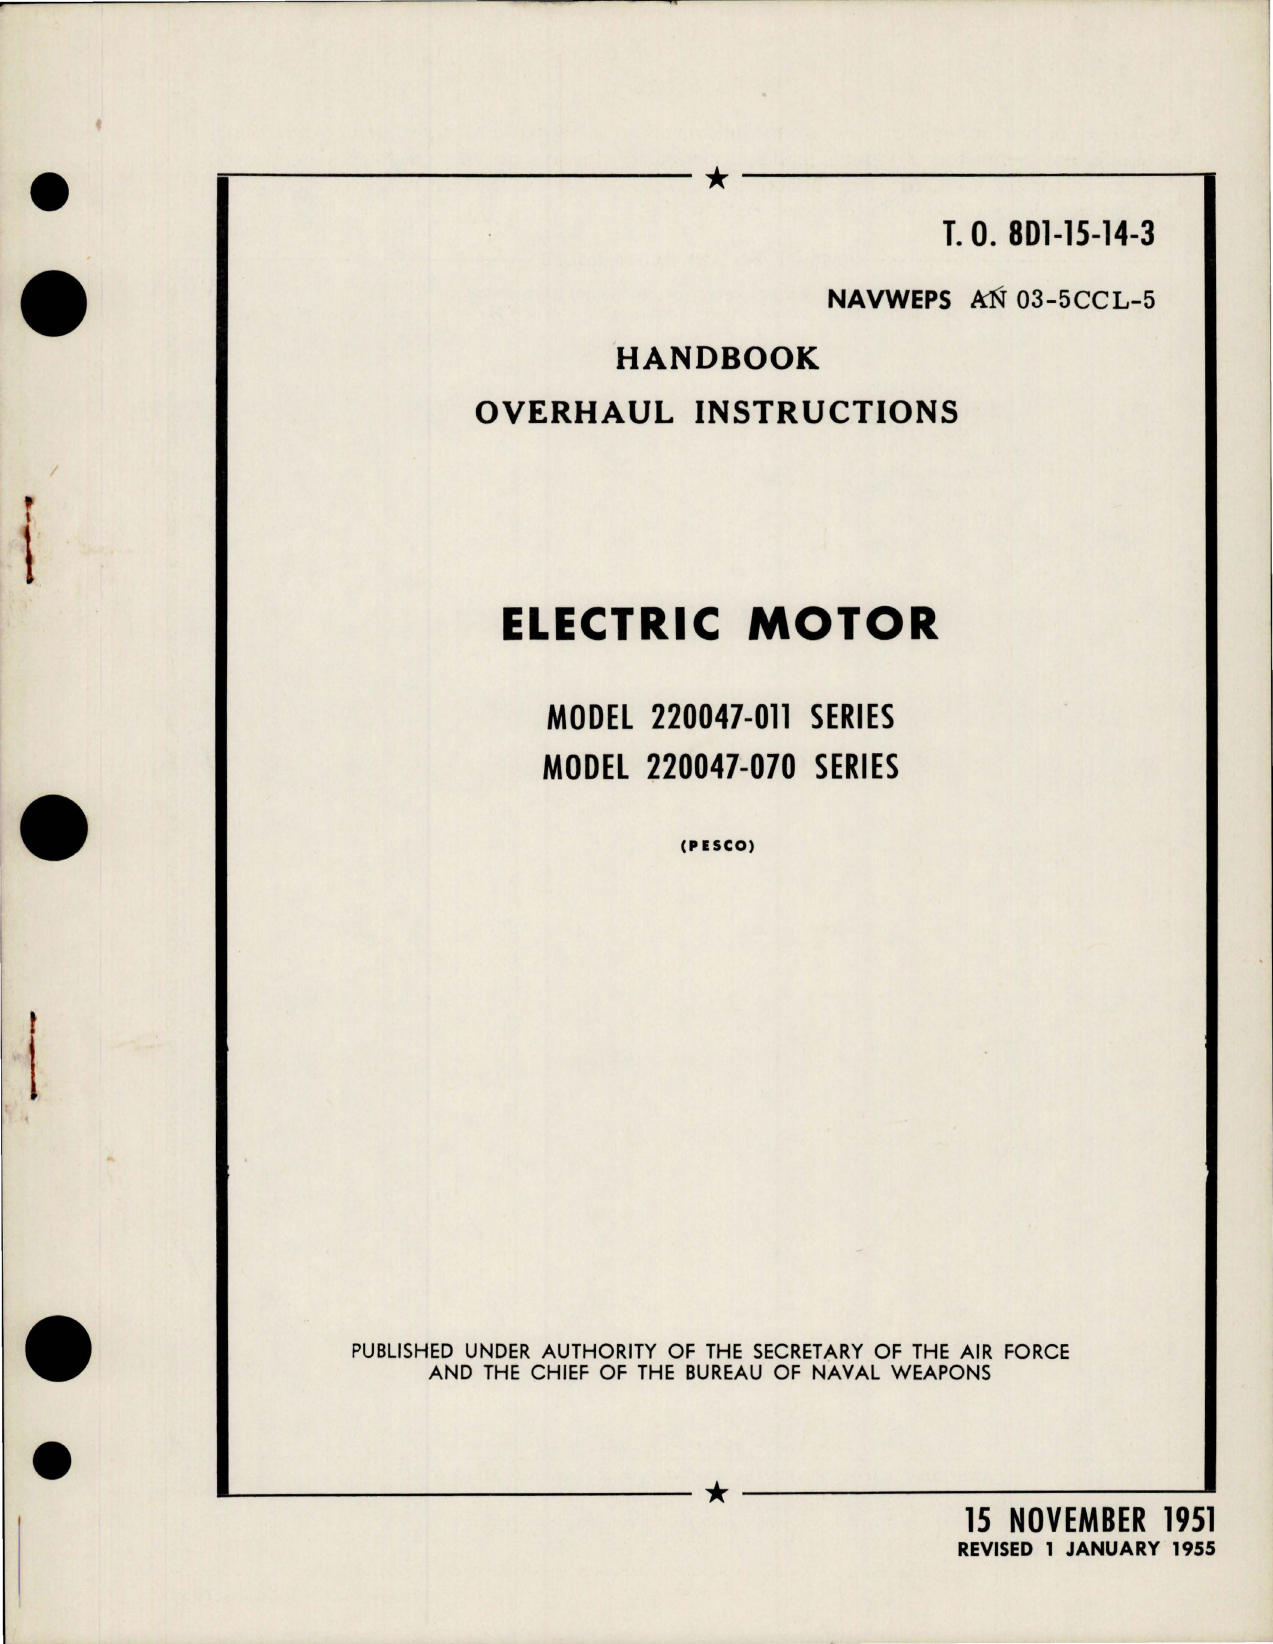 Sample page 1 from AirCorps Library document: Overhaul Instructions for Electric Motor - Model 220047-011 and 220047-070 Series